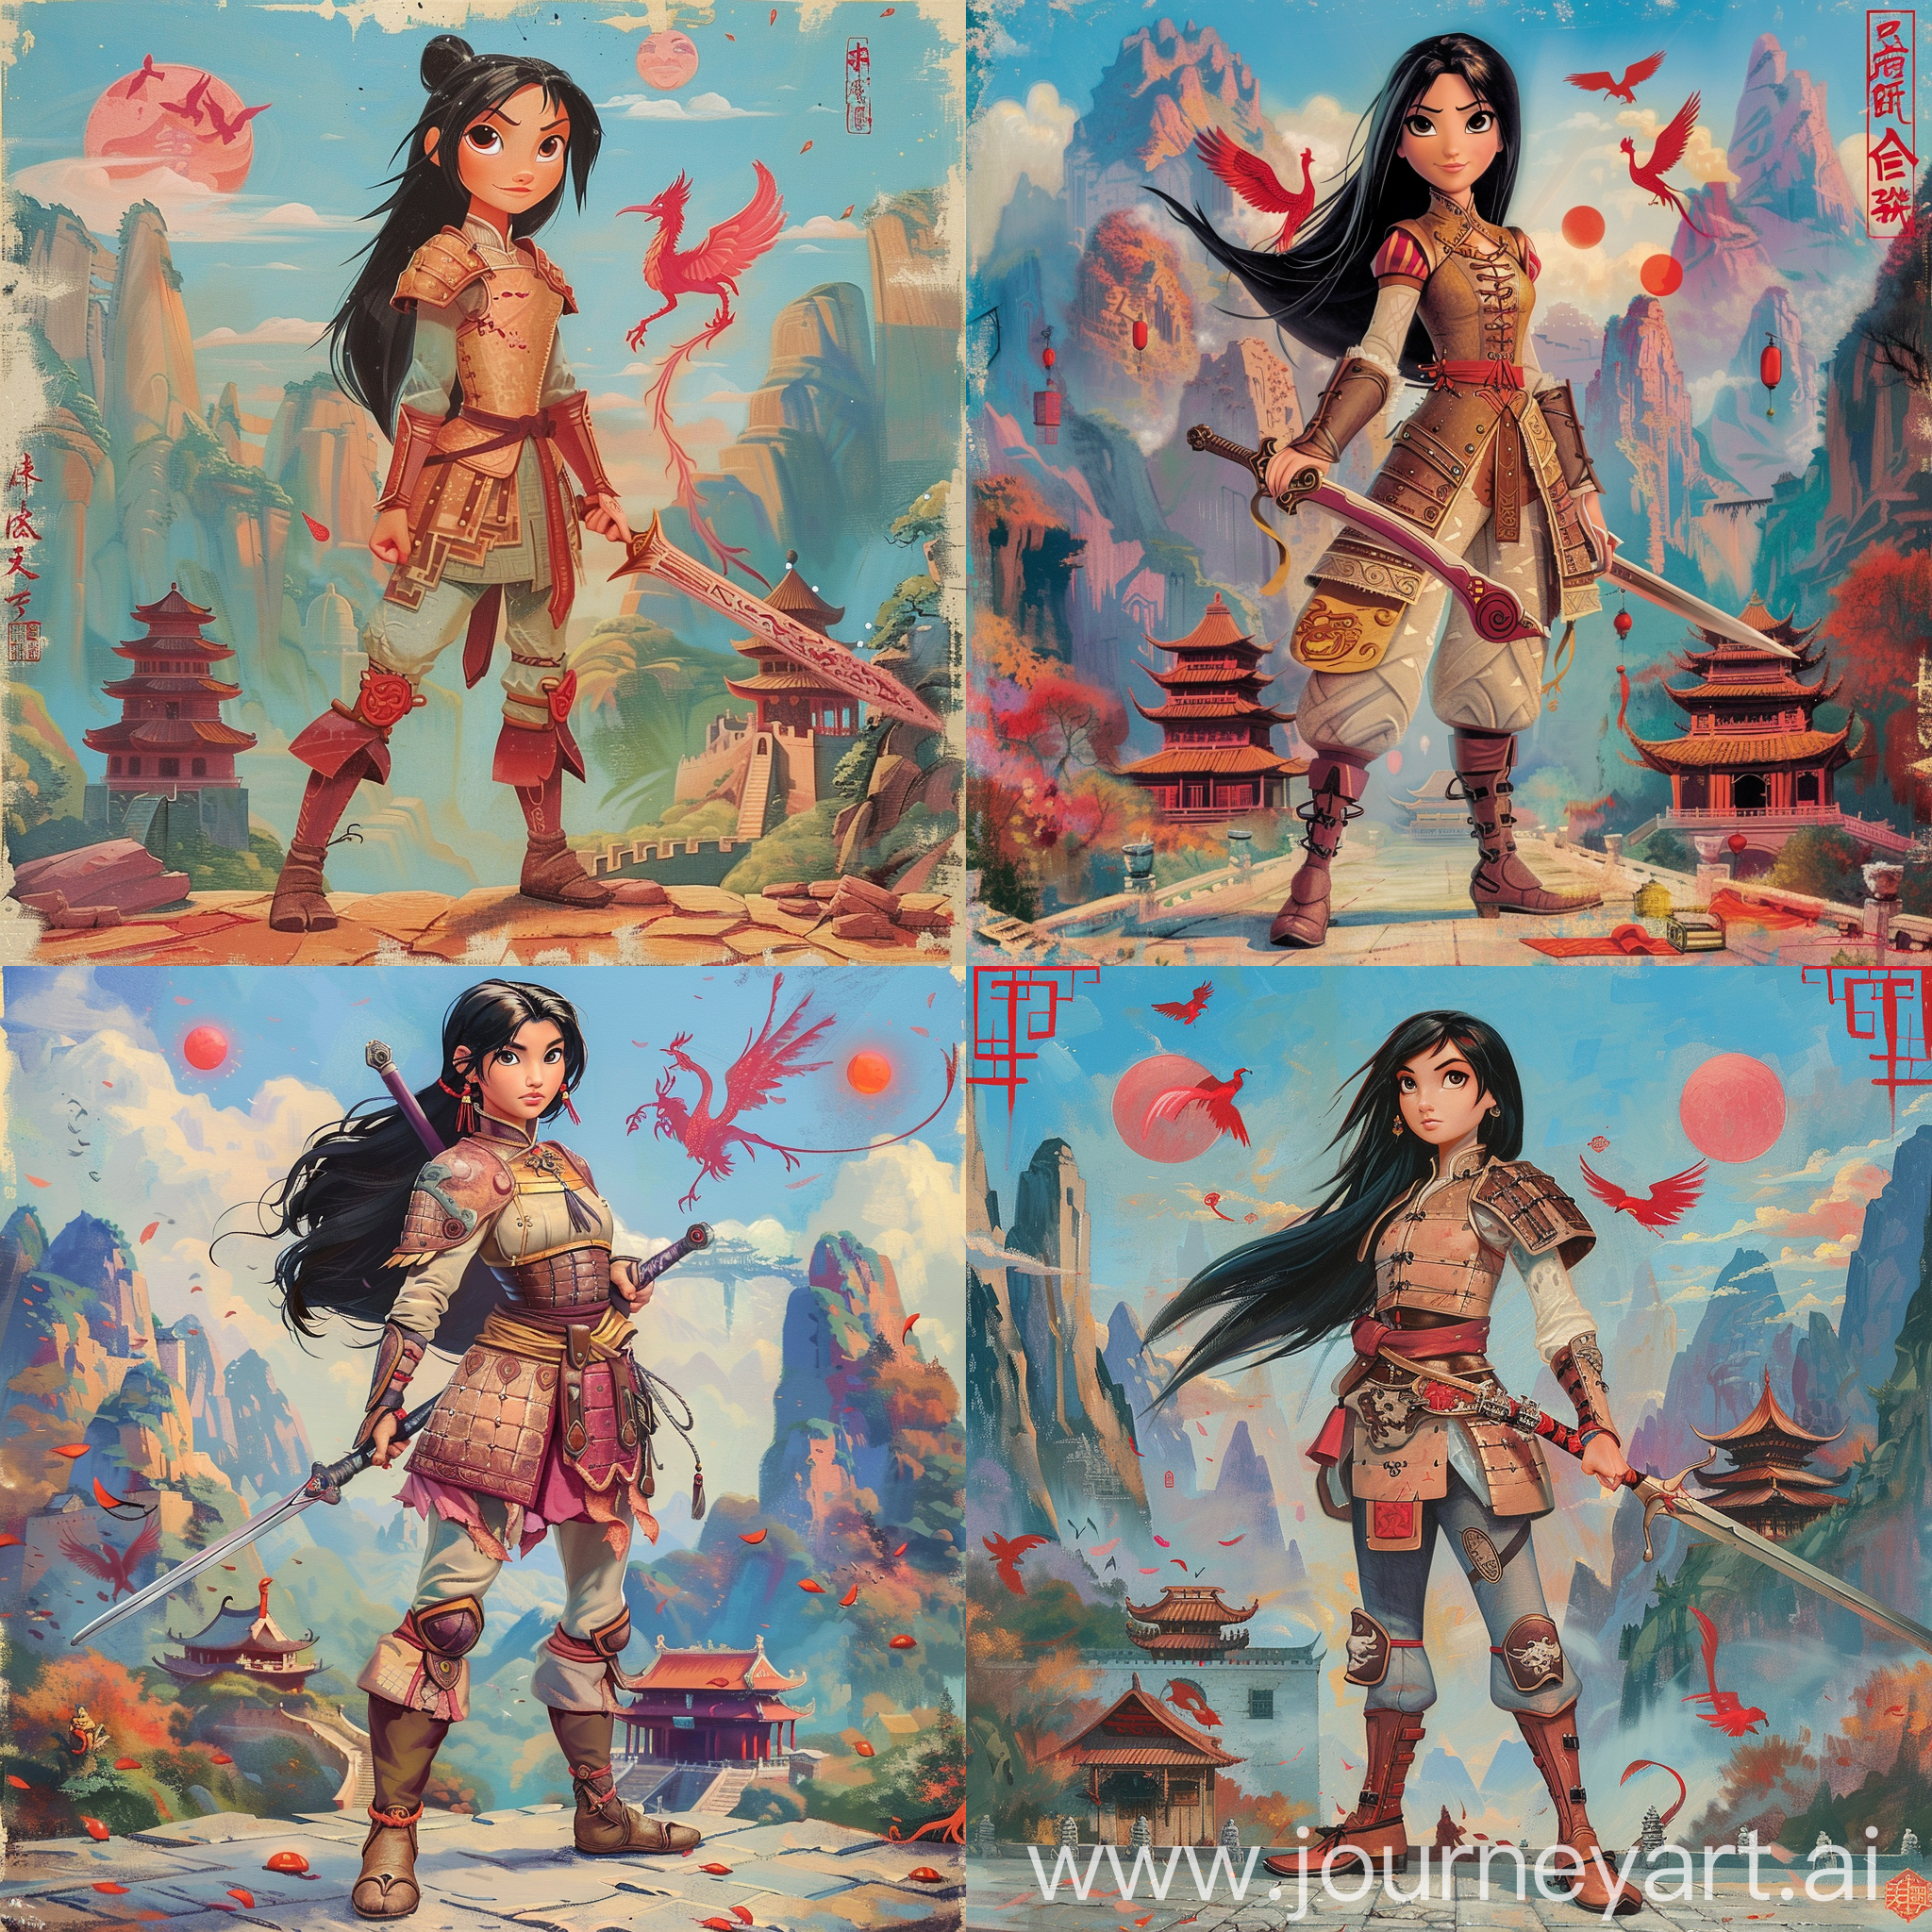 Historic painting style:

a Disney charming lady Cassandra, from Tangled cartoon, she has black chin long hair, she wears light brown and deep magenta color Chinese style medieval armor and boots, she holds a Chinese sword in right hand, 

Chinese Guilin mountains and temple as background, red phoenix and three small red suns in blue sky.